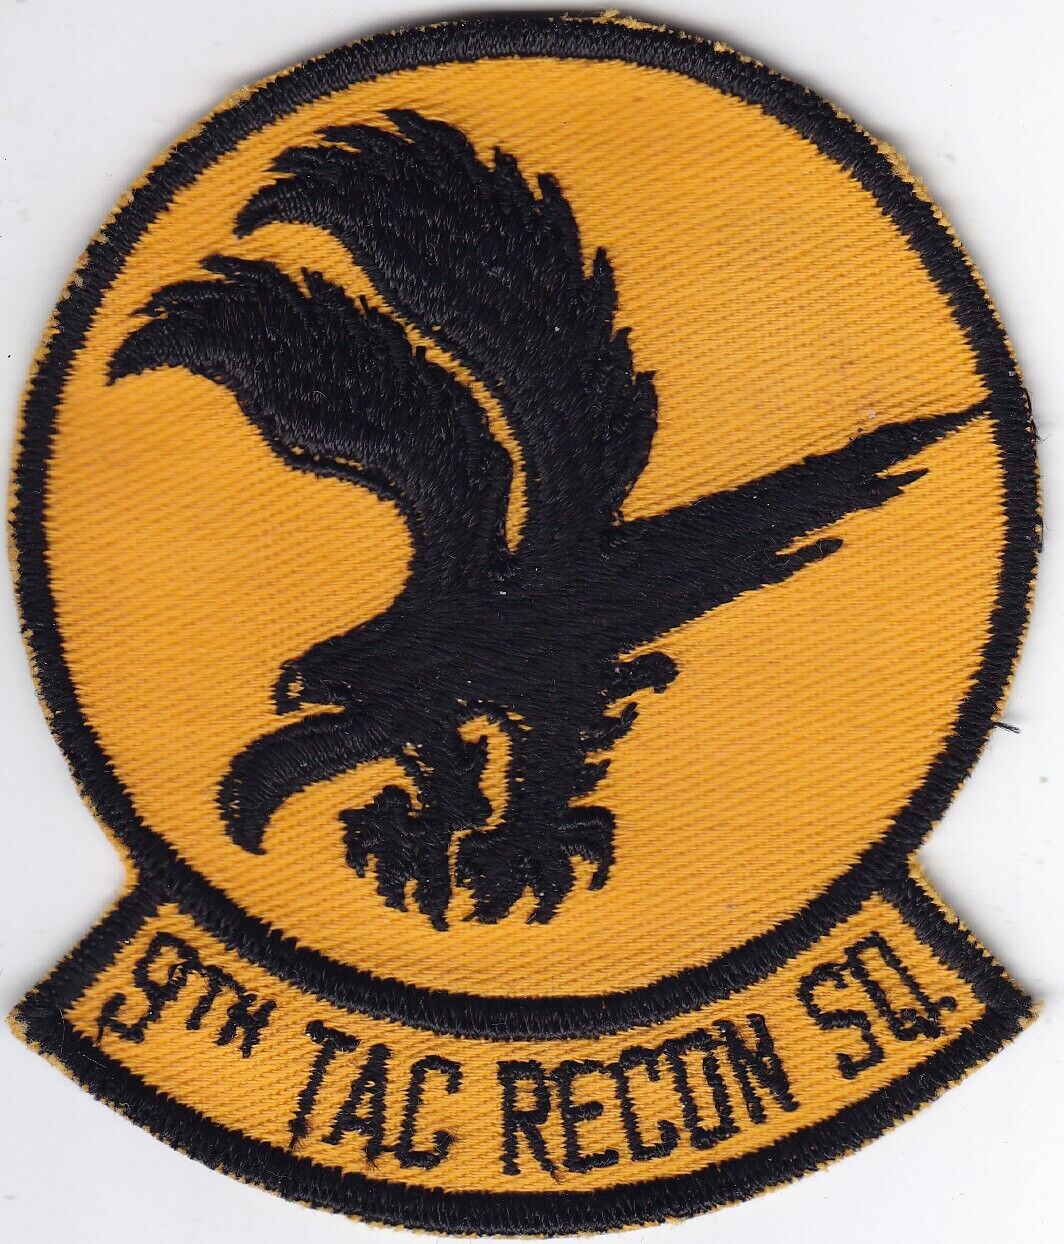 Nice 1950s-60s USAF 9th Tac Recon Squadron Patch